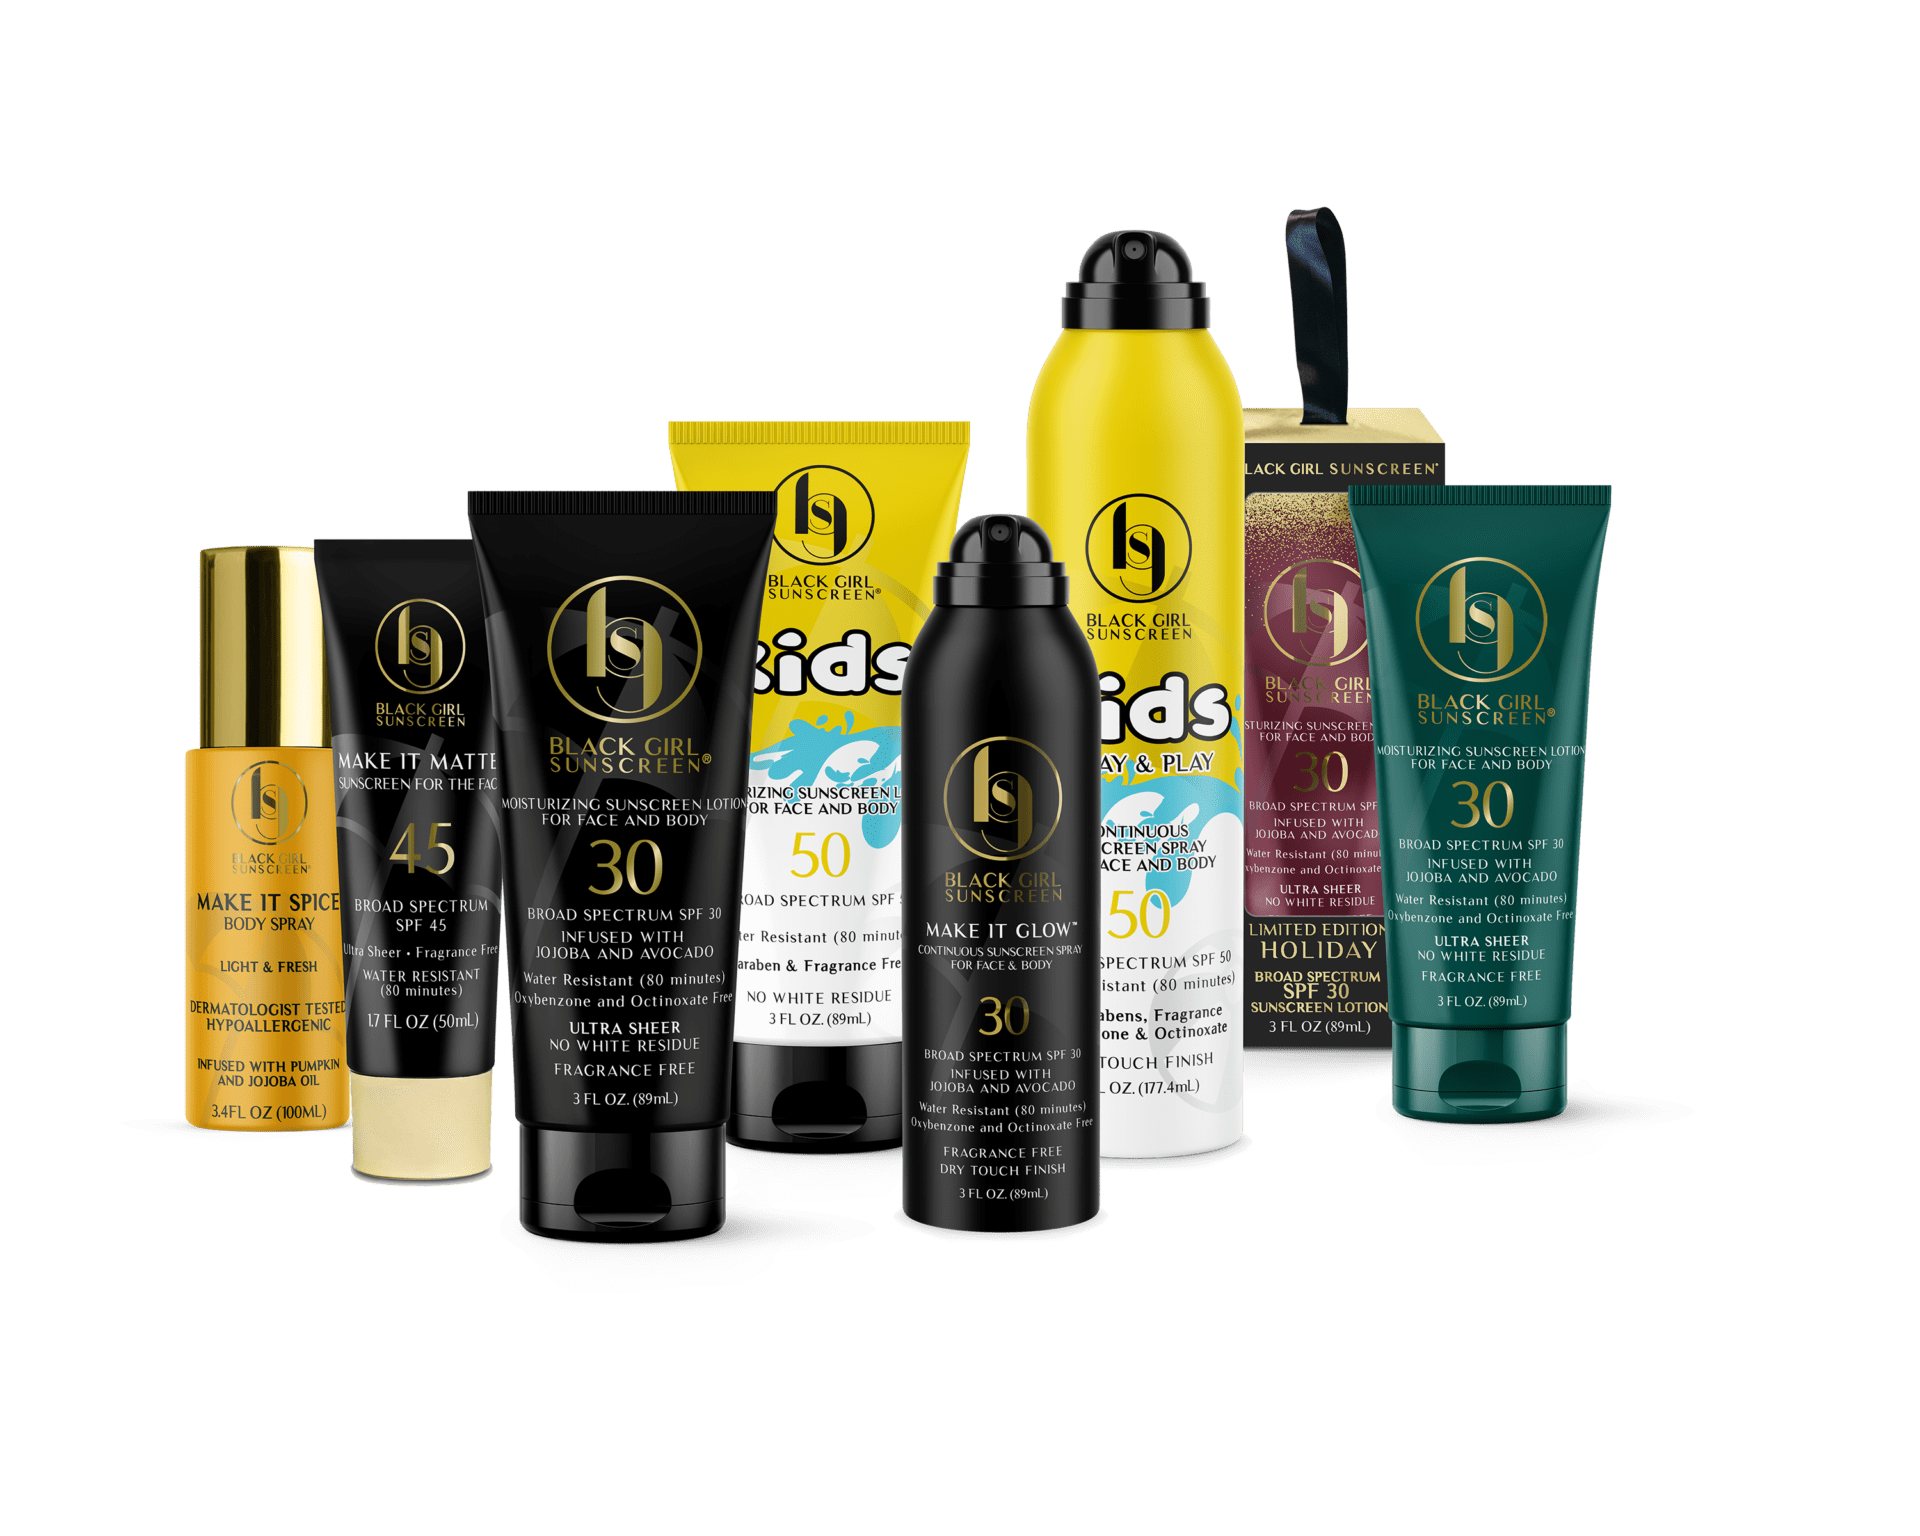 Pixellent Packaging Design header image with Black Girl Sunscreen products